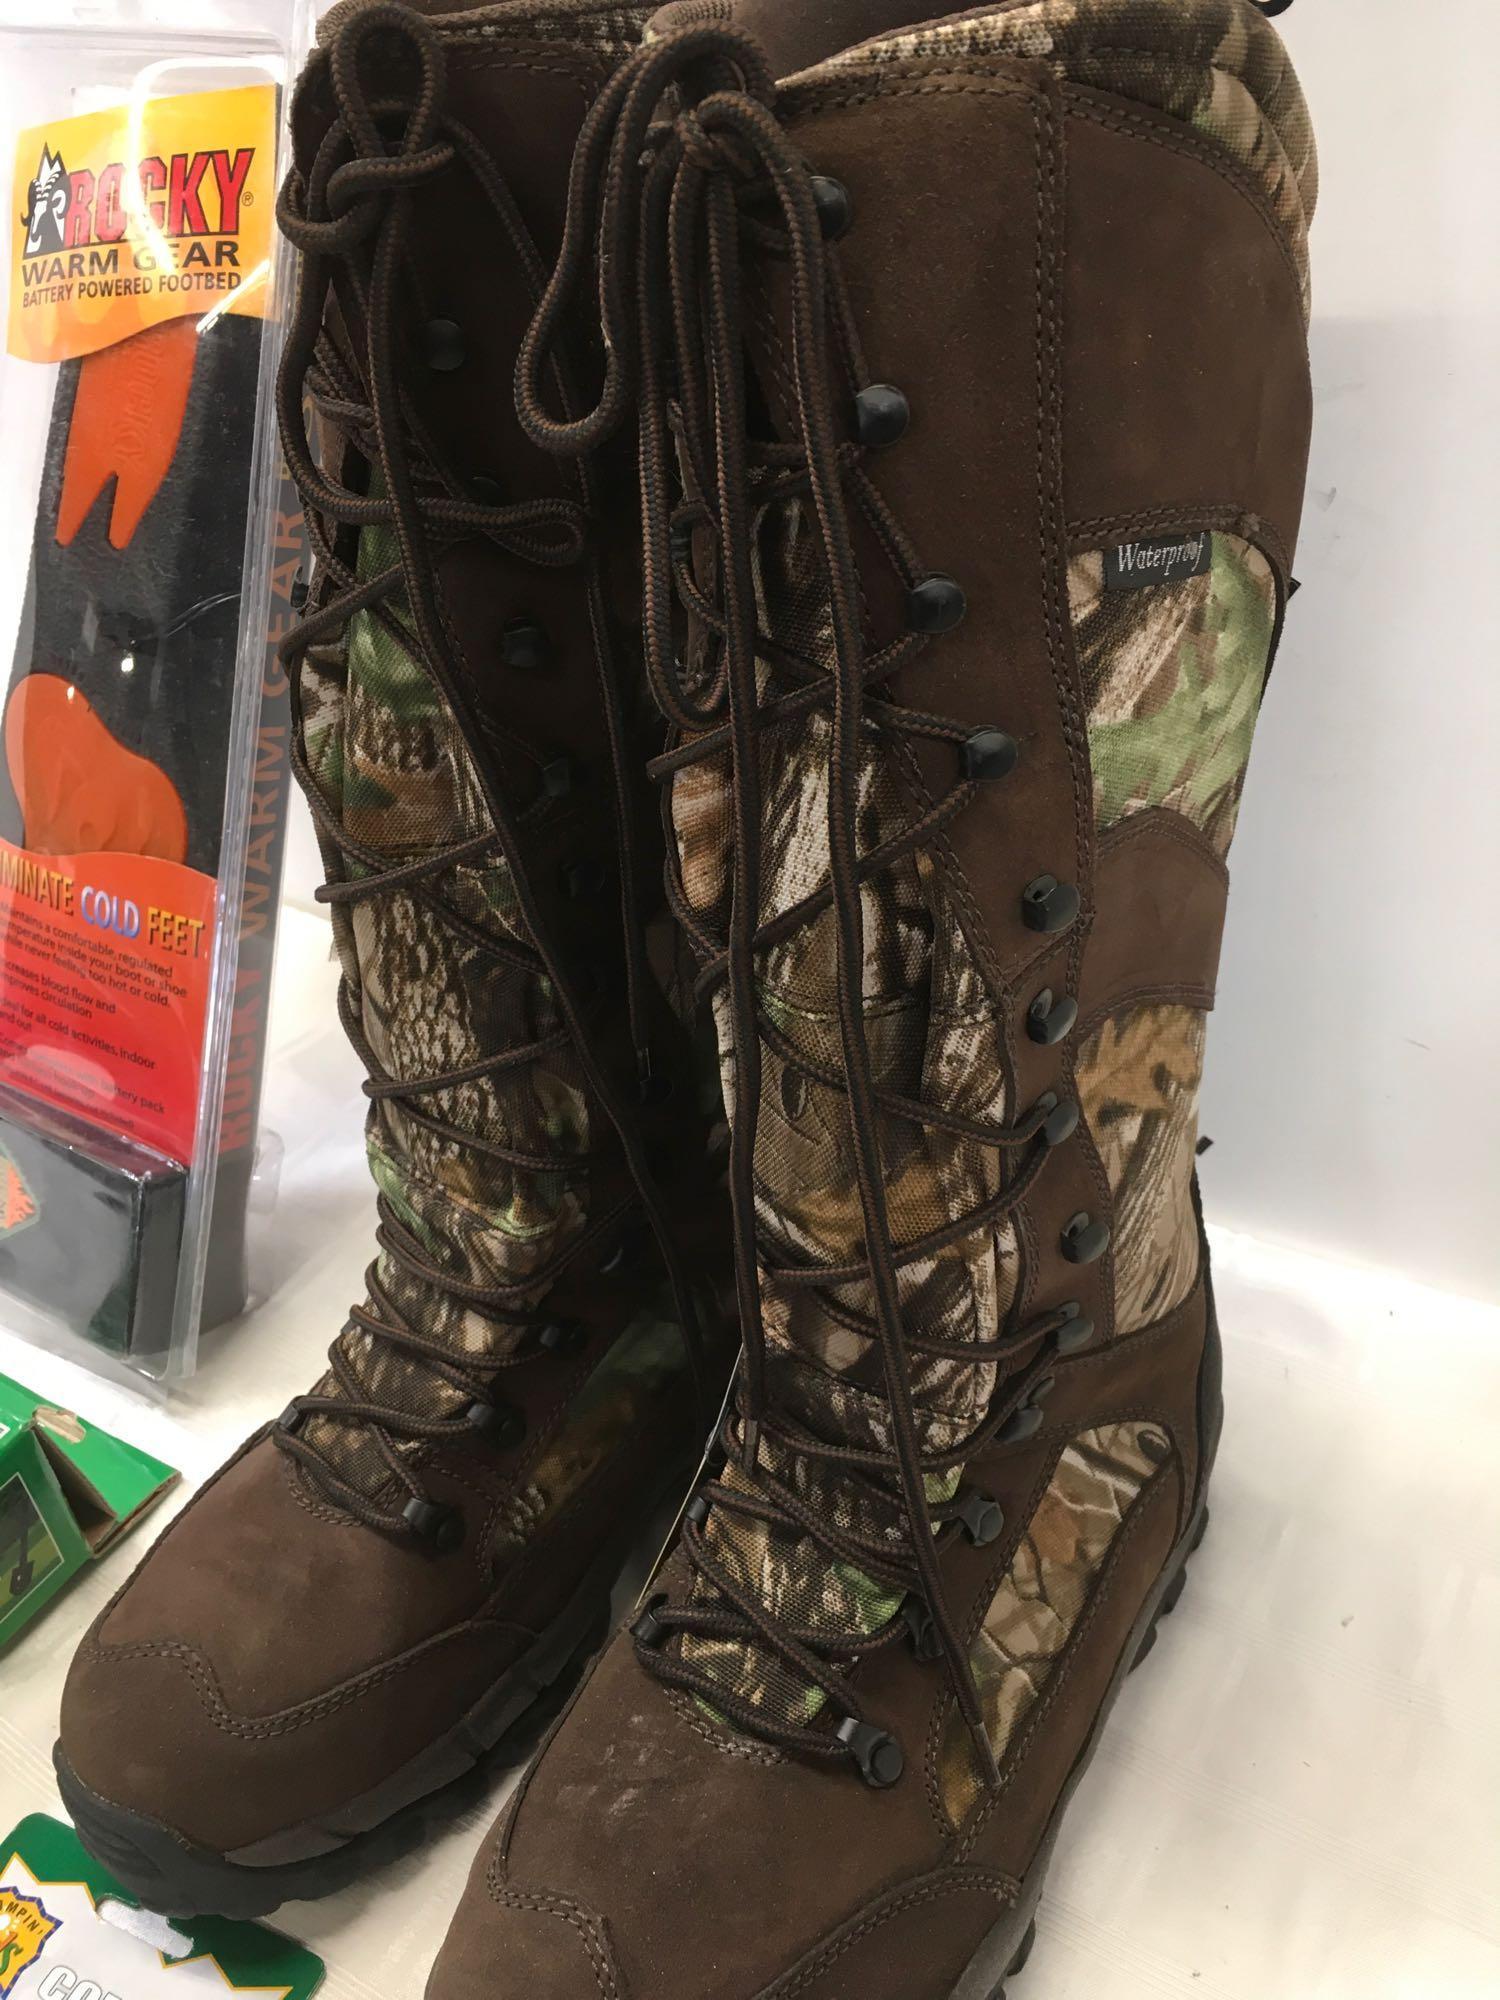 New Camo Hunting Boots size 8.5, Rocky footbed, foldable shovel and compass